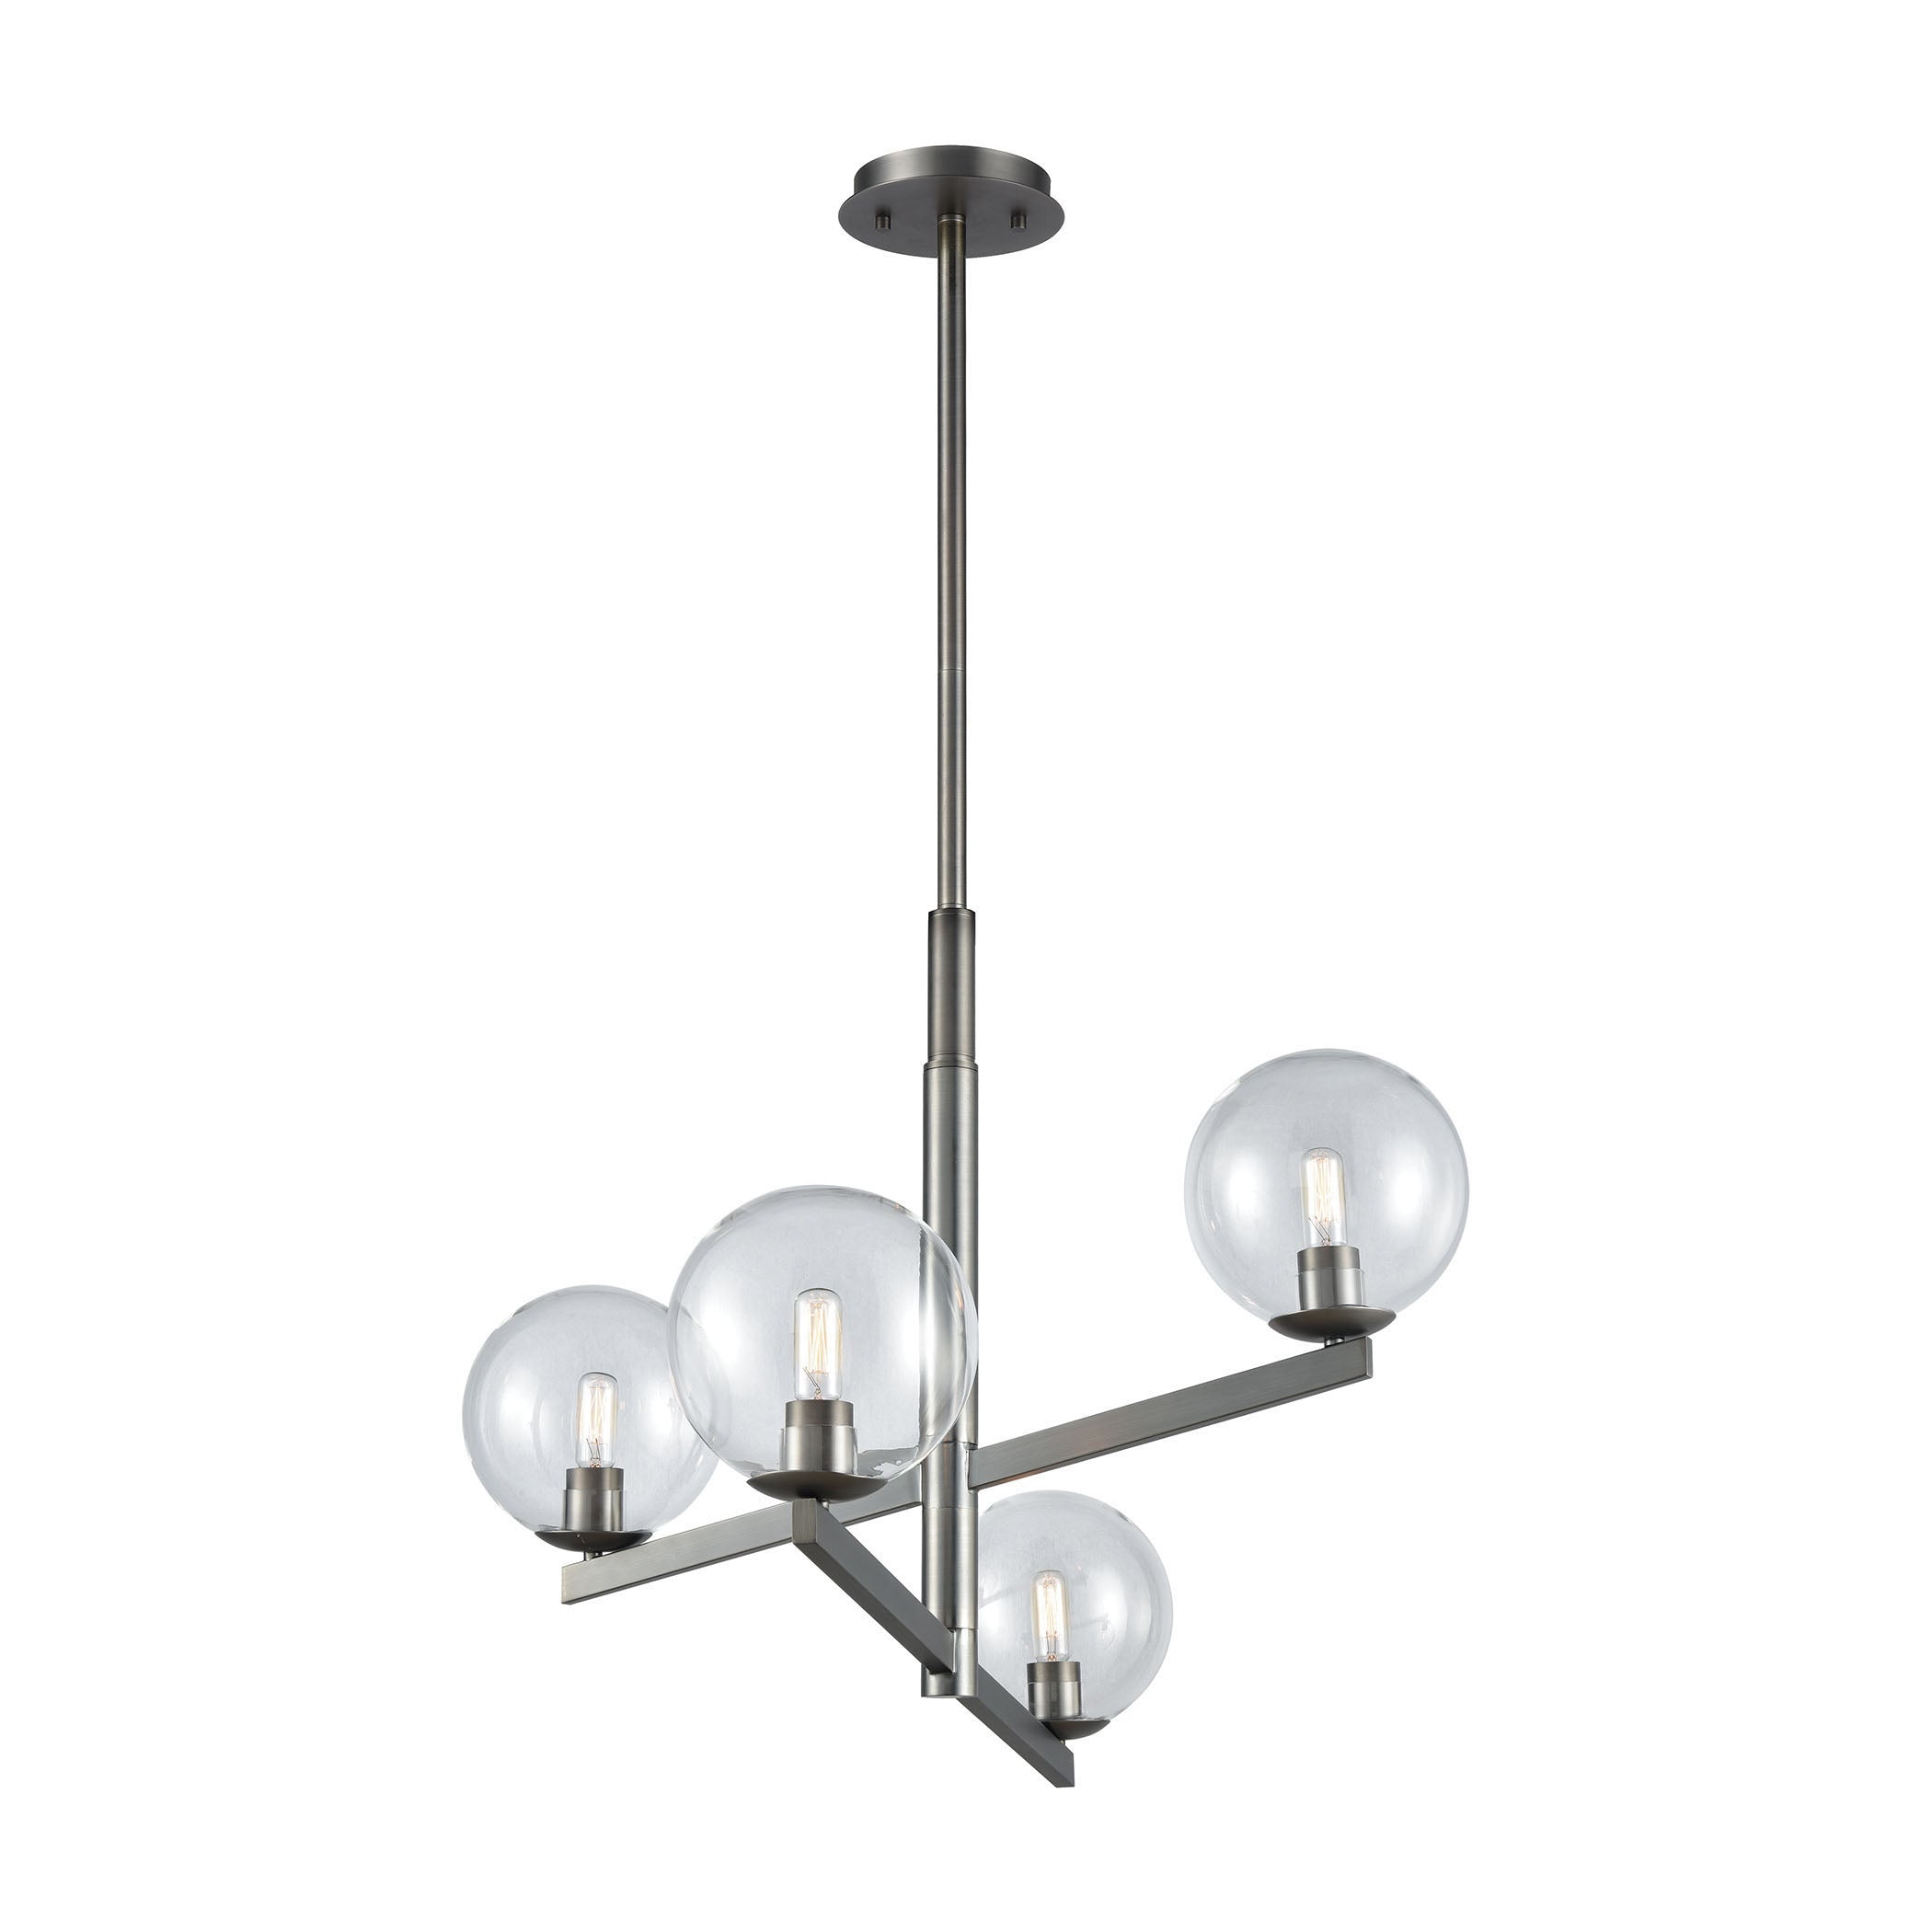 ELK Lighting 12181/4 Globes of Light 4-Light Chandelier in Brushed Black Nickel with Clear Blown Glass